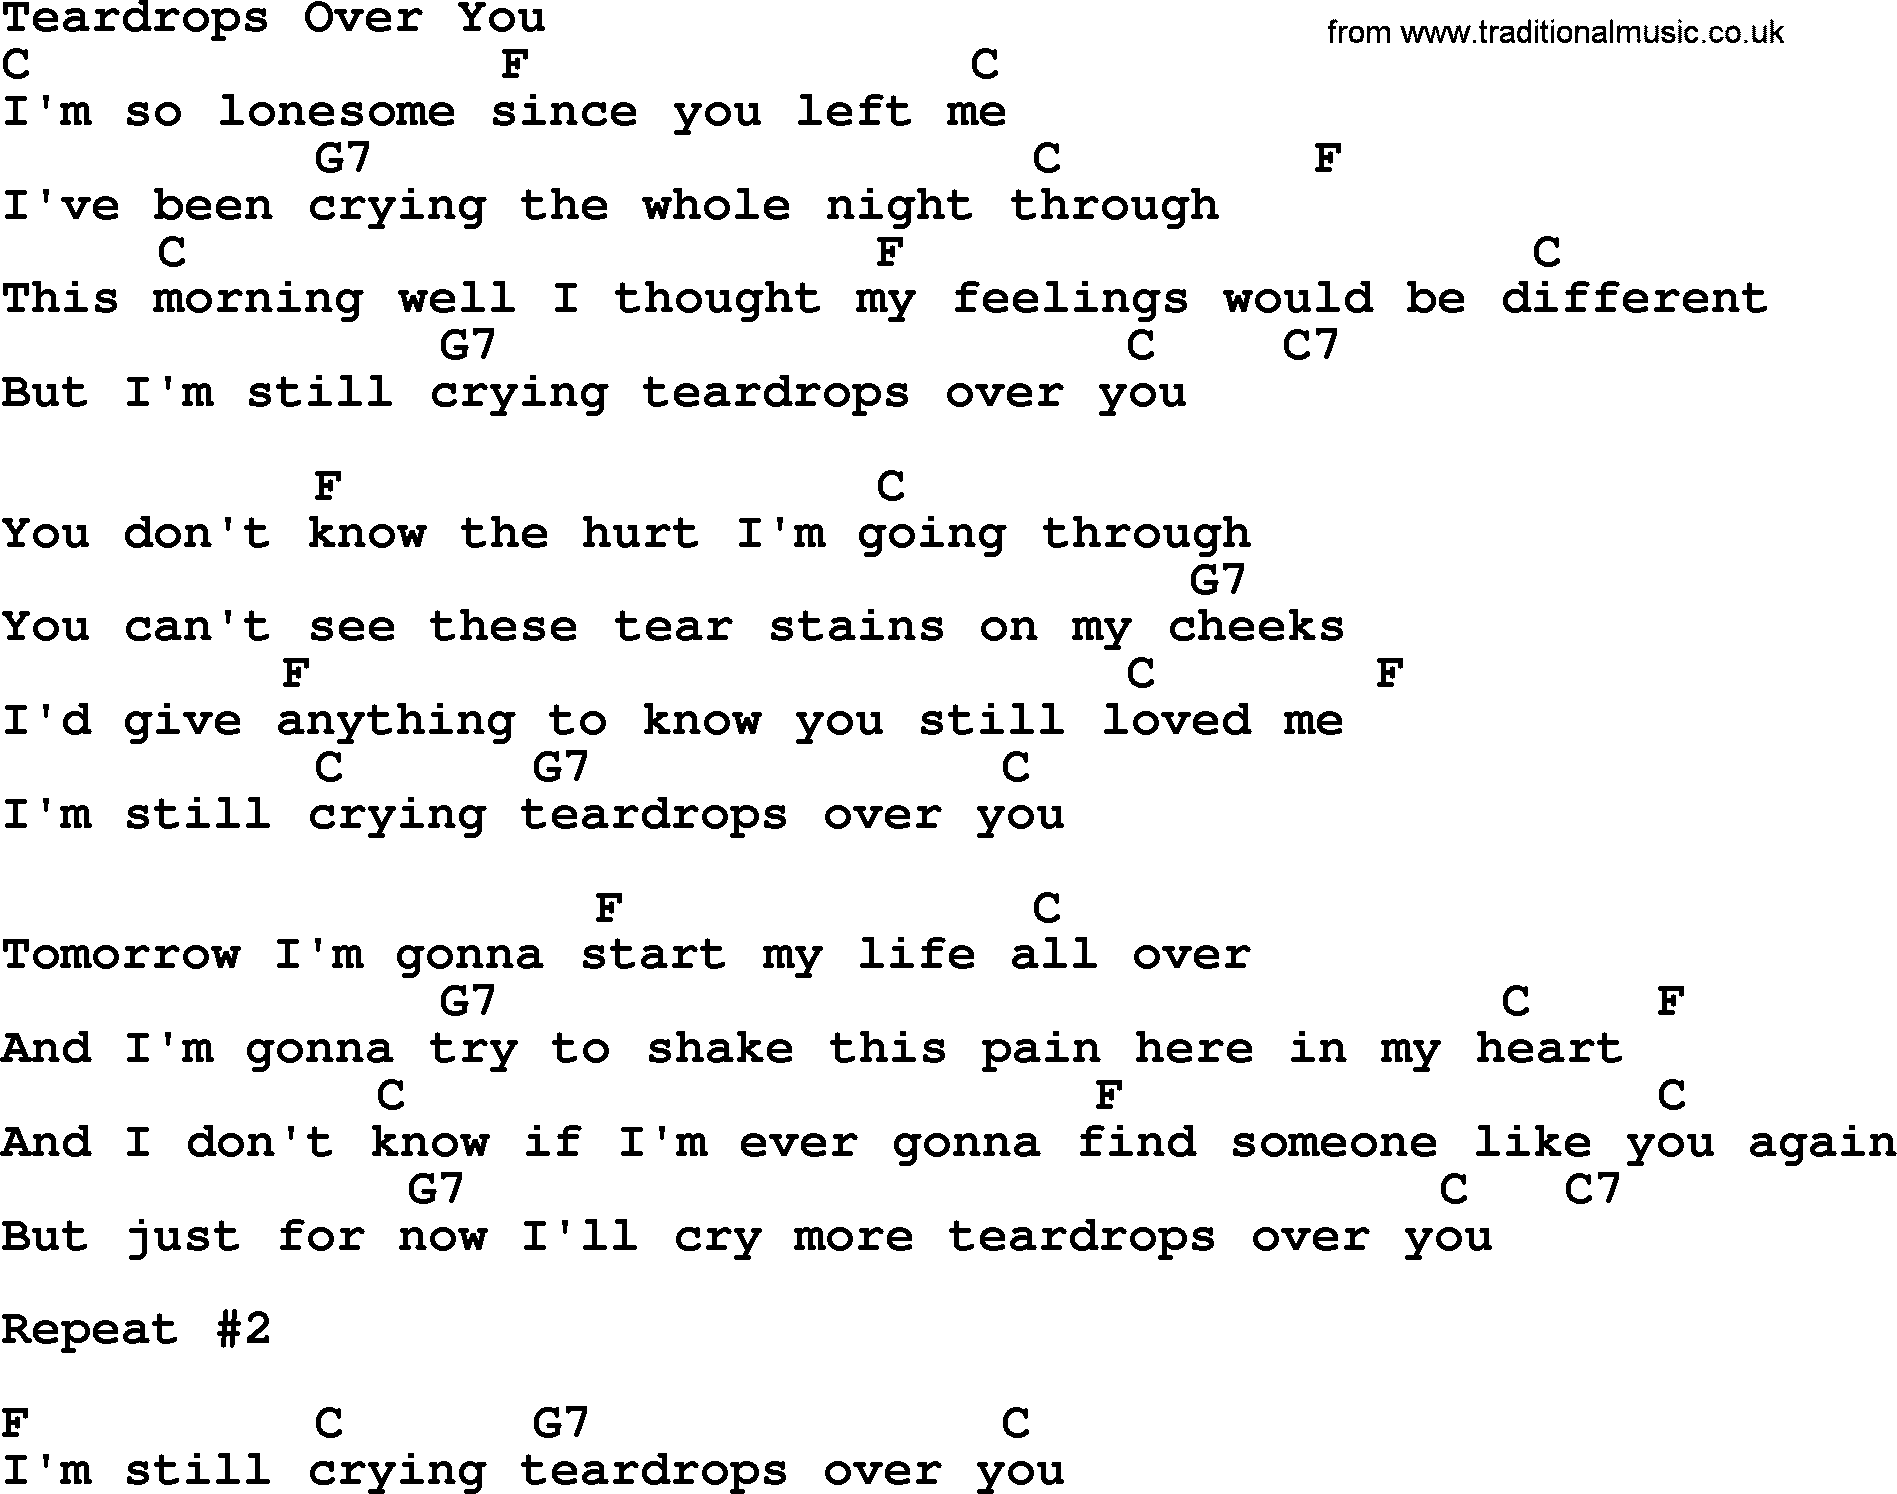 Bluegrass song: Teardrops Over You, lyrics and chords